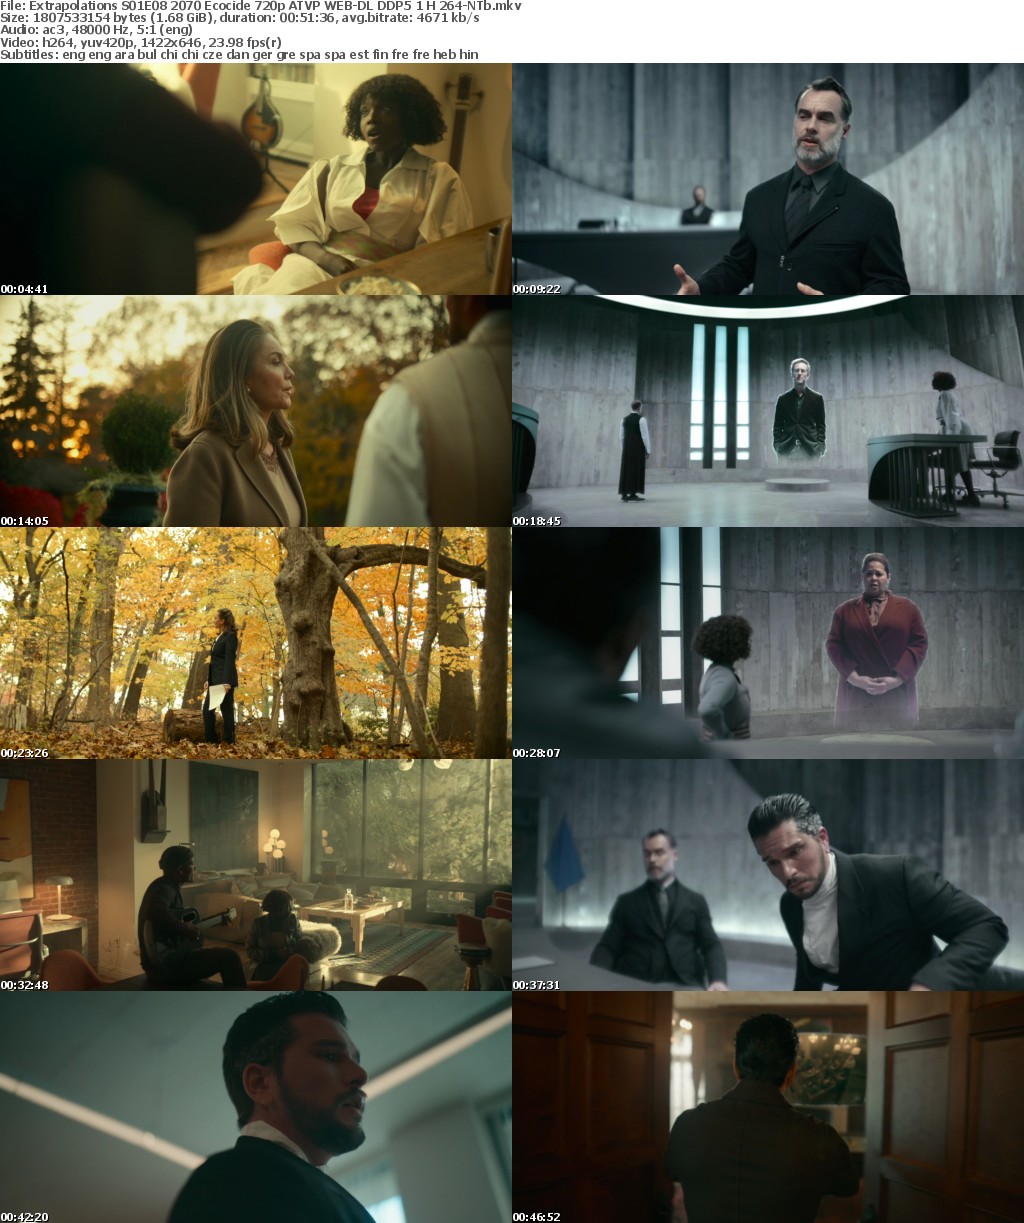 Extrapolations S01E08 2070 Ecocide 720p ATVP WEB-DL DDP5 1 H 264-NTb